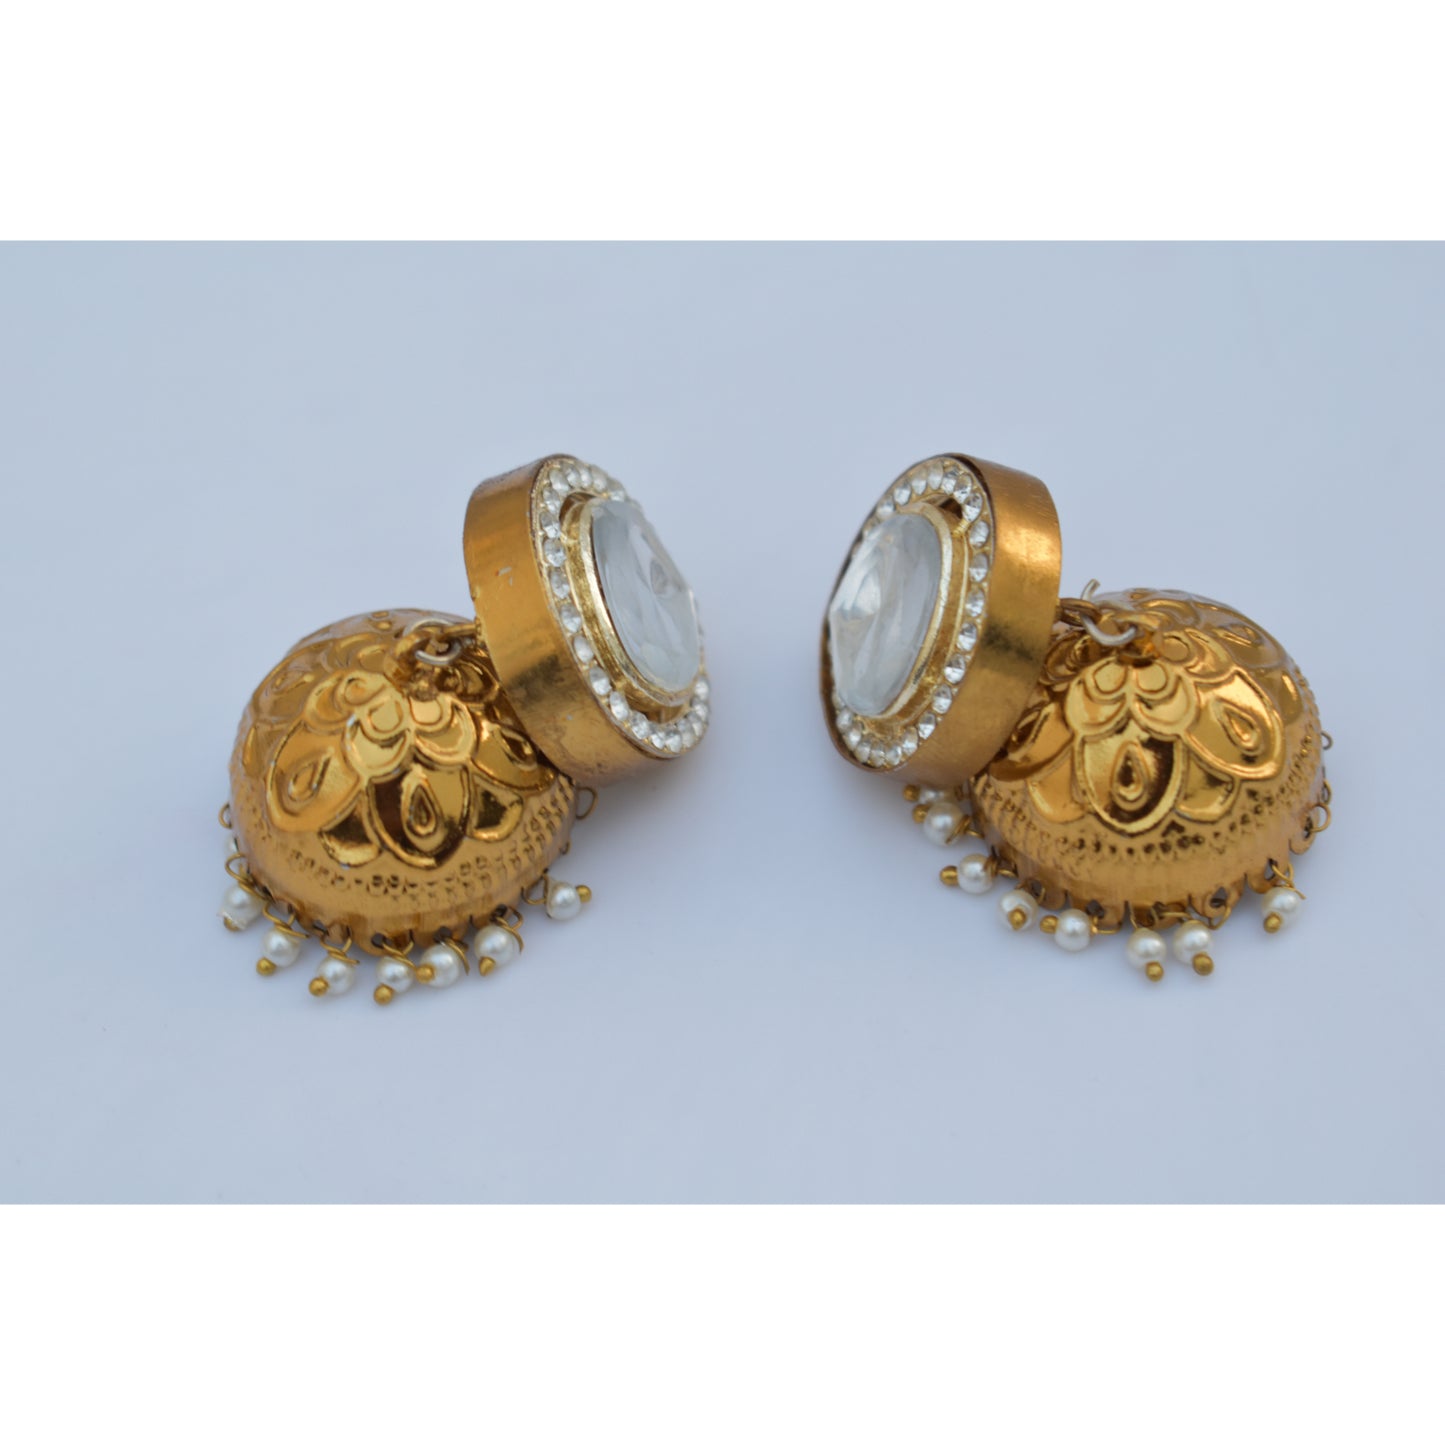 A pair of goldplated antique finish jhumka earing